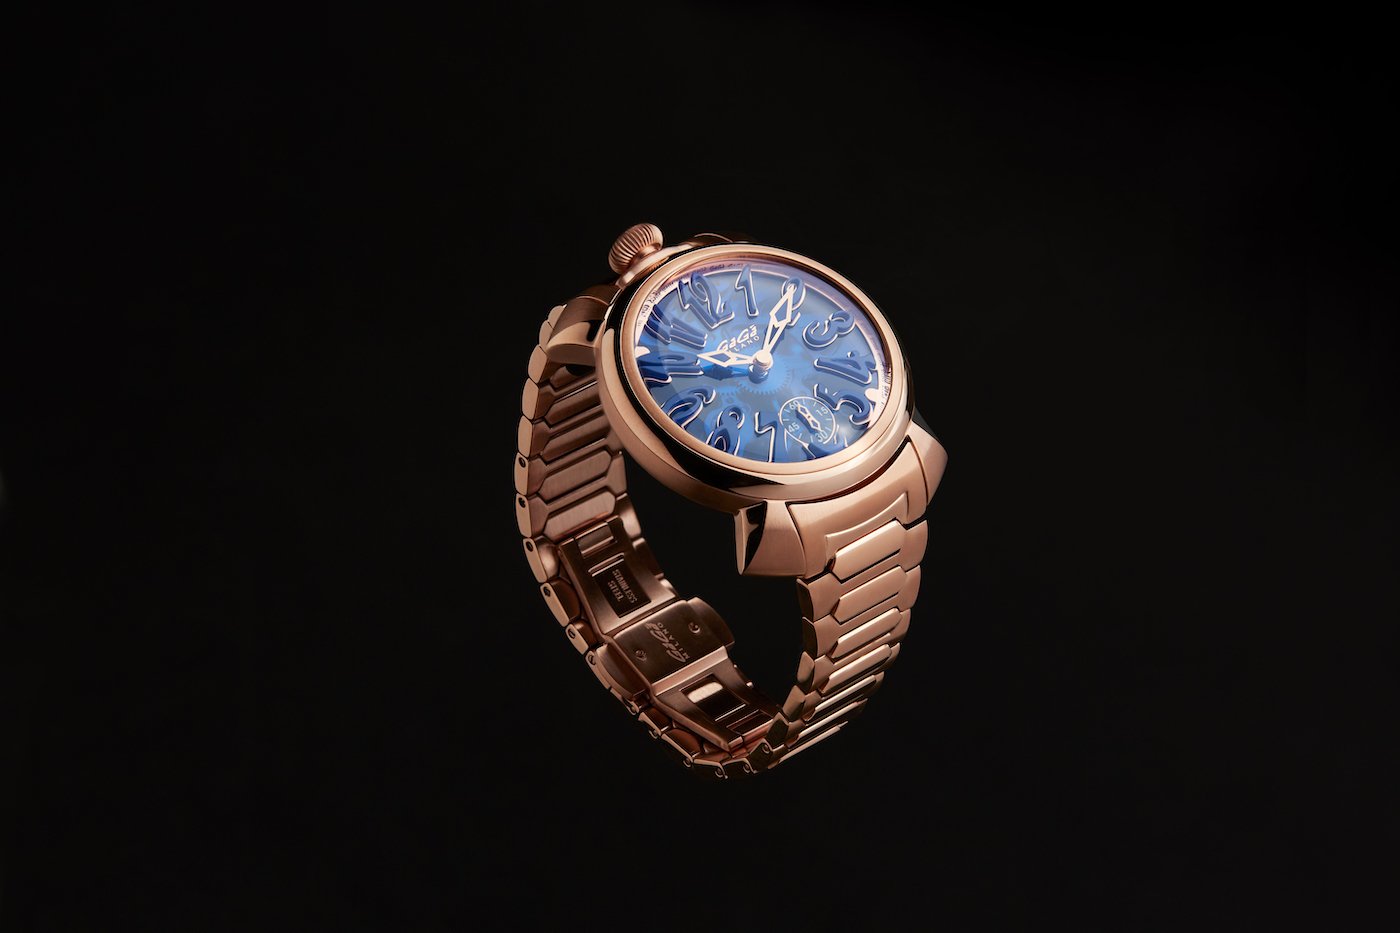 Gagà Milano unveils the Manuale Forty-Four Hand-Winding collection